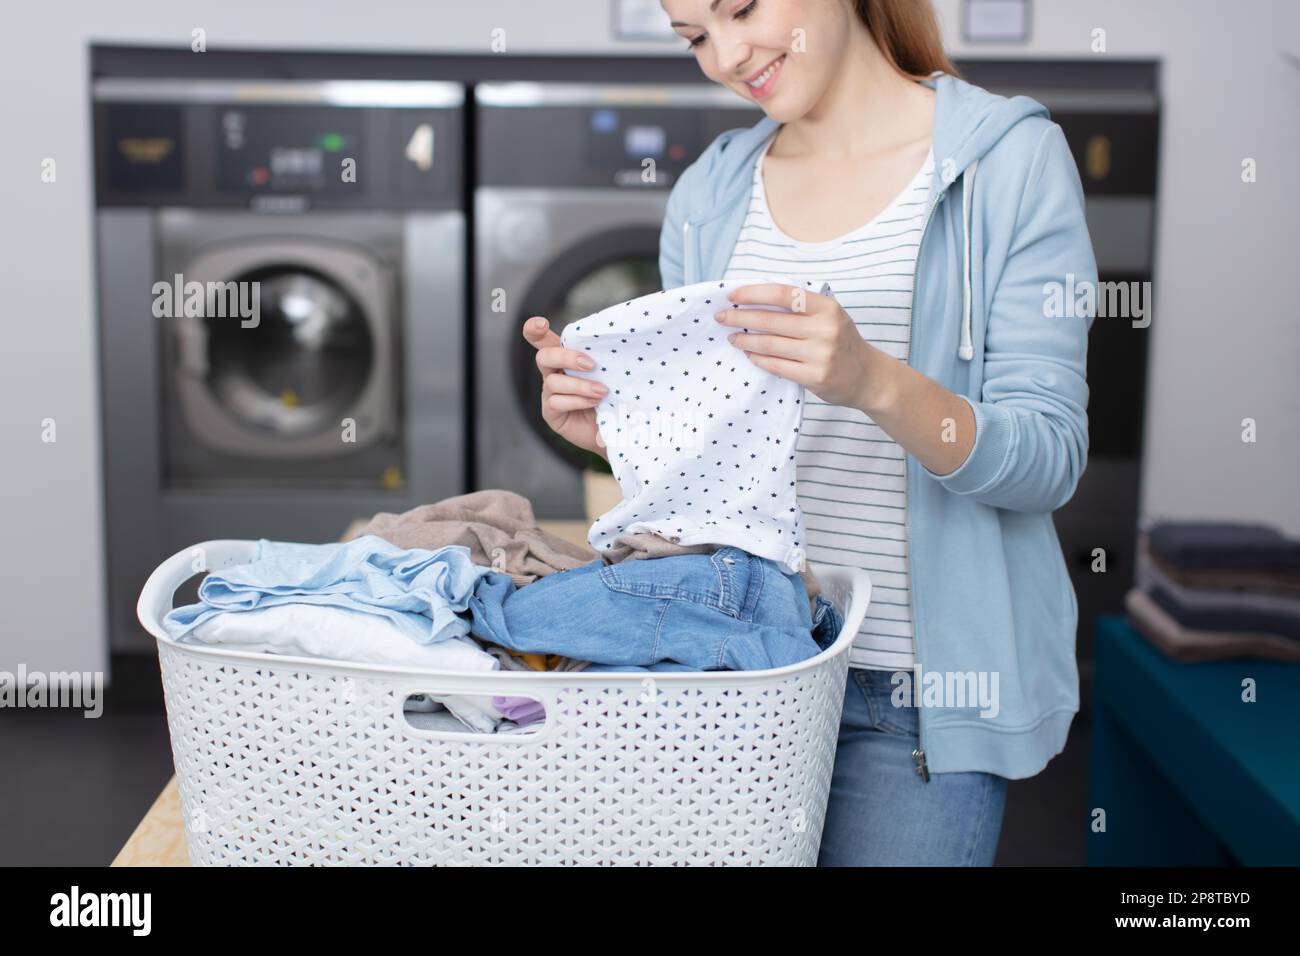 https://c8.alamy.com/comp/2P8TBYD/beautiful-young-woman-is-doing-the-laundry-2P8TBYD.jpg